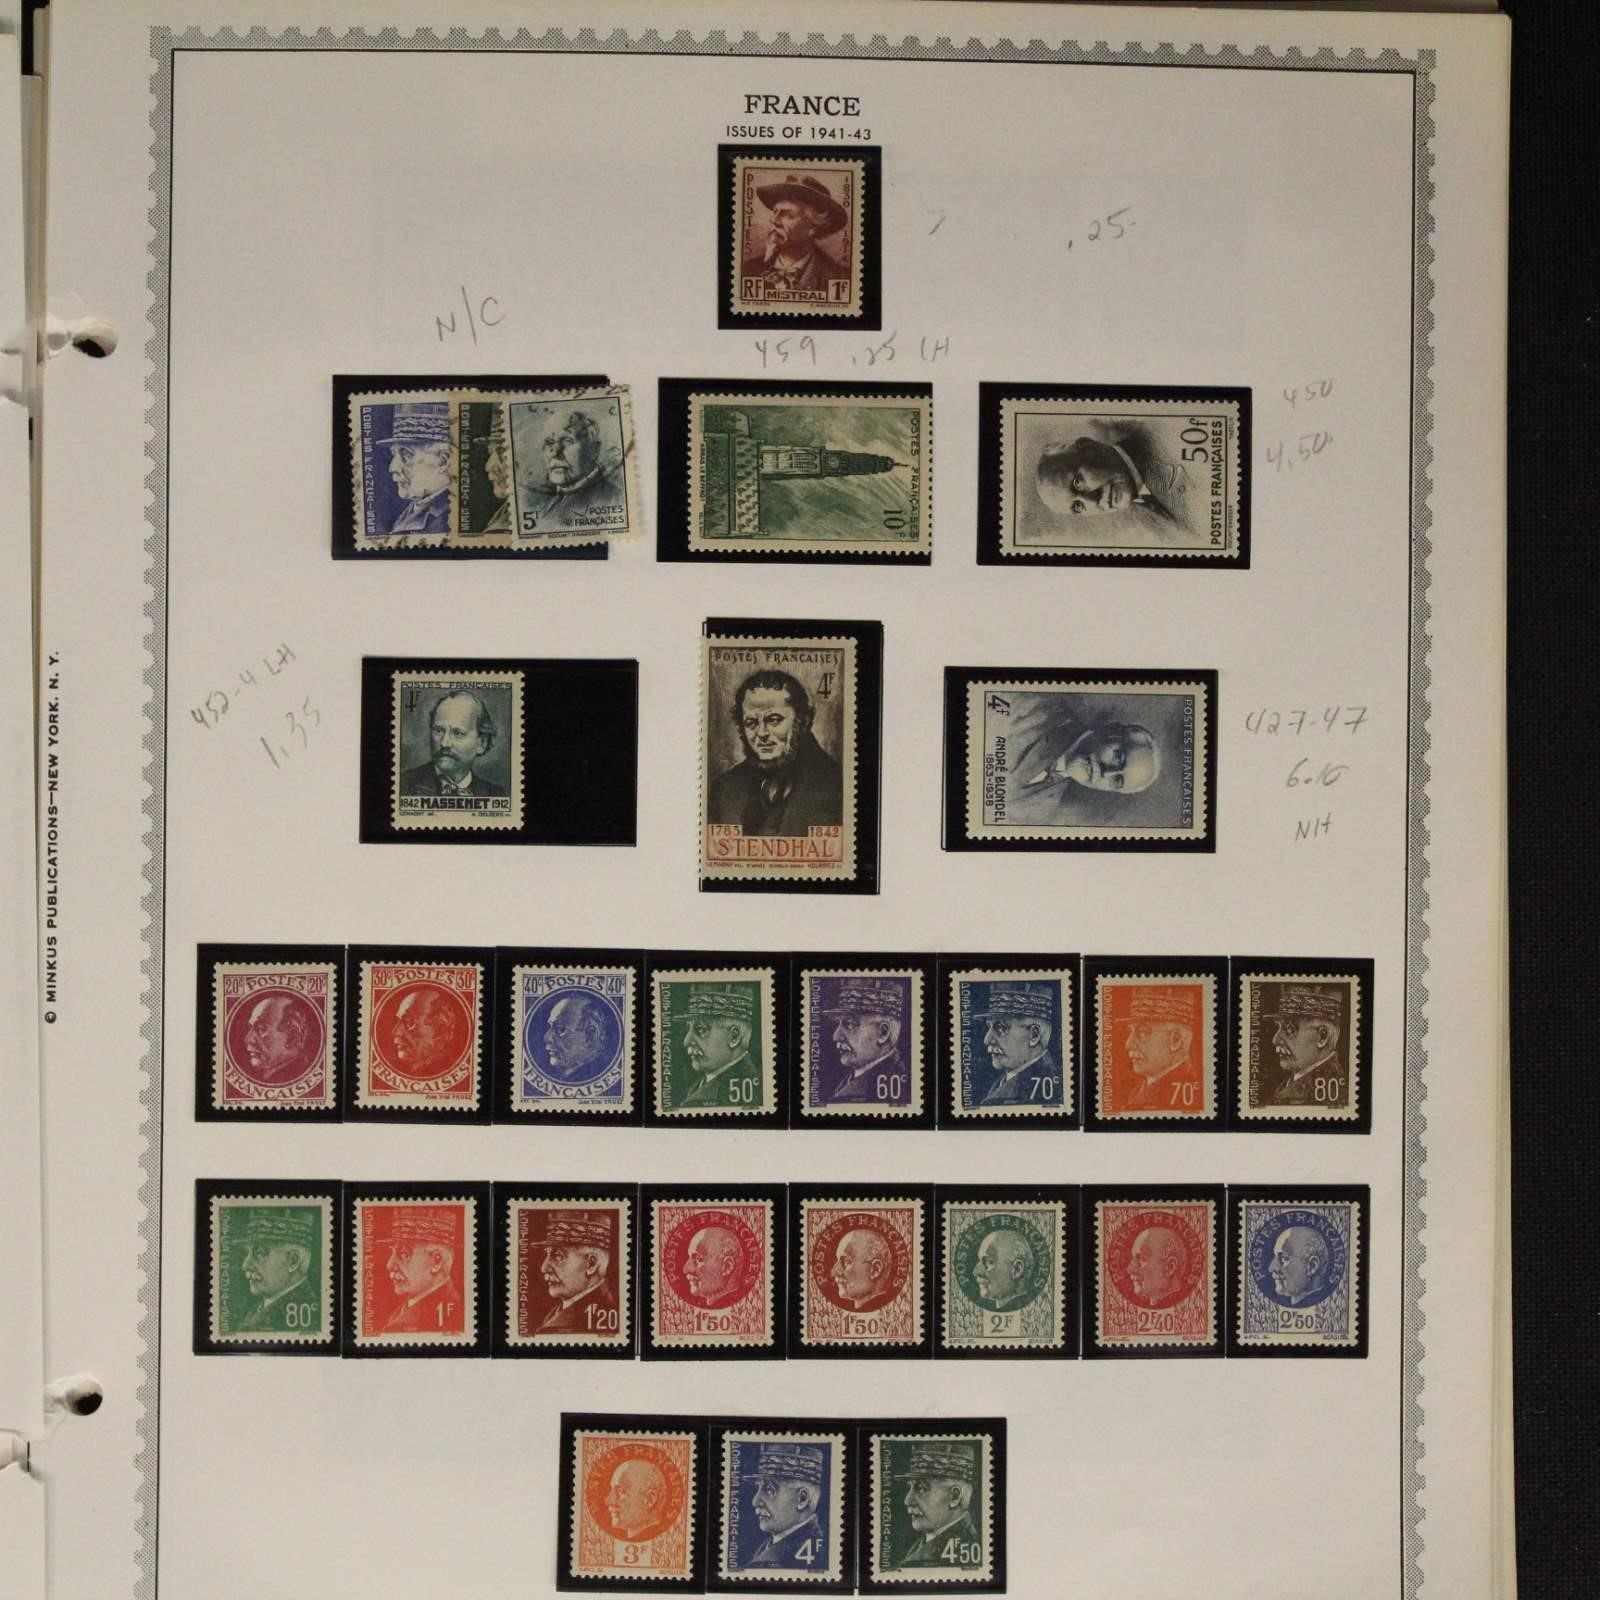 October 6th, 2019 Weekly Stamps & Collectibles Auction